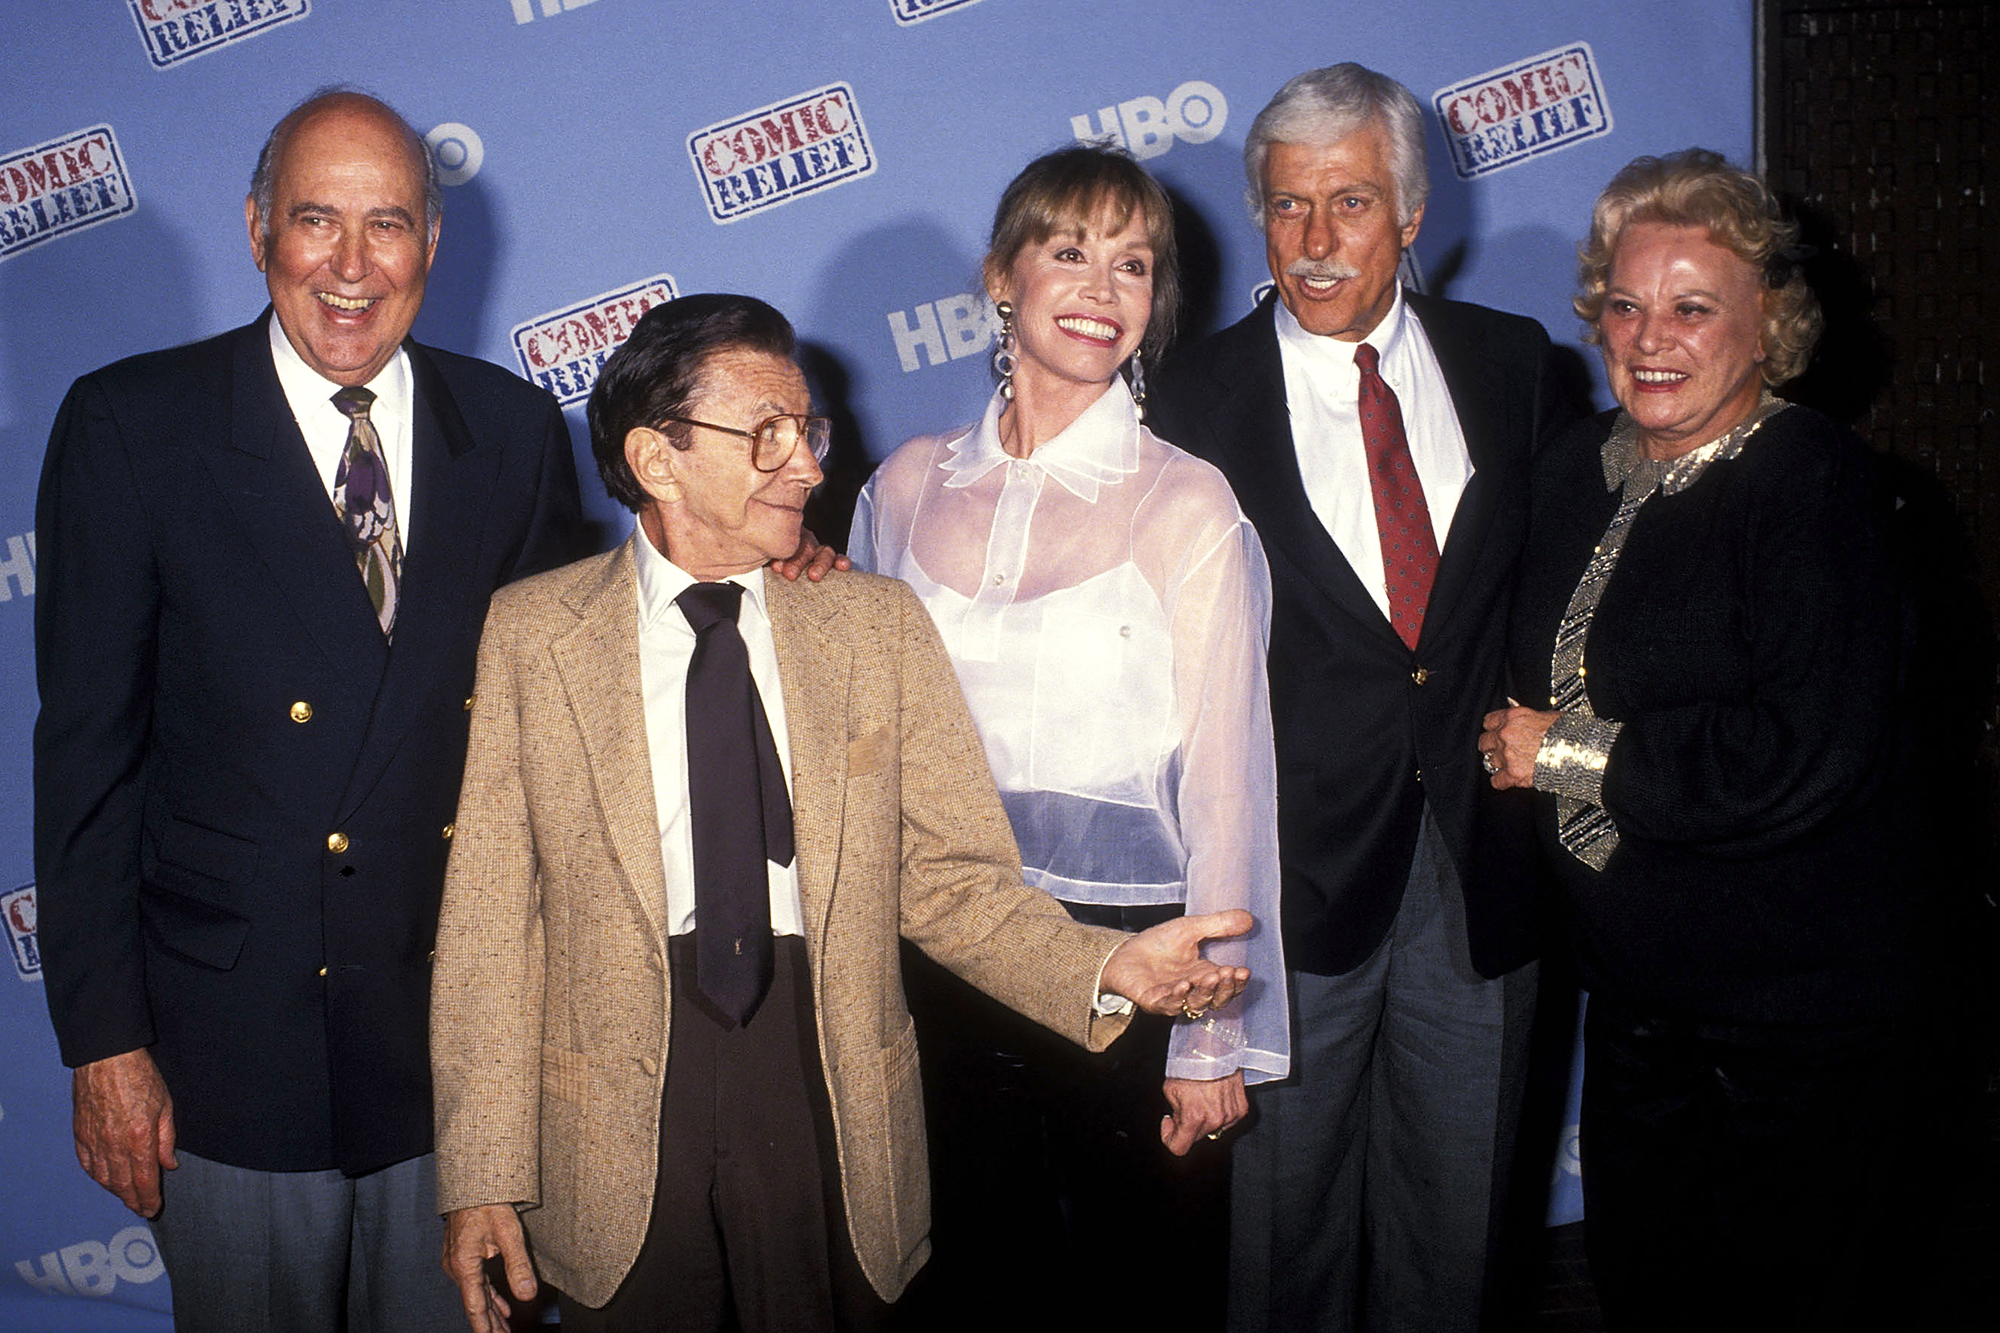 From left: Carl Reiner, Morey Amsterdam, Mary Tyler Moore, Dick Van Dyke and Rose Marie, on May 16, 1992 in Universal City, Calif.